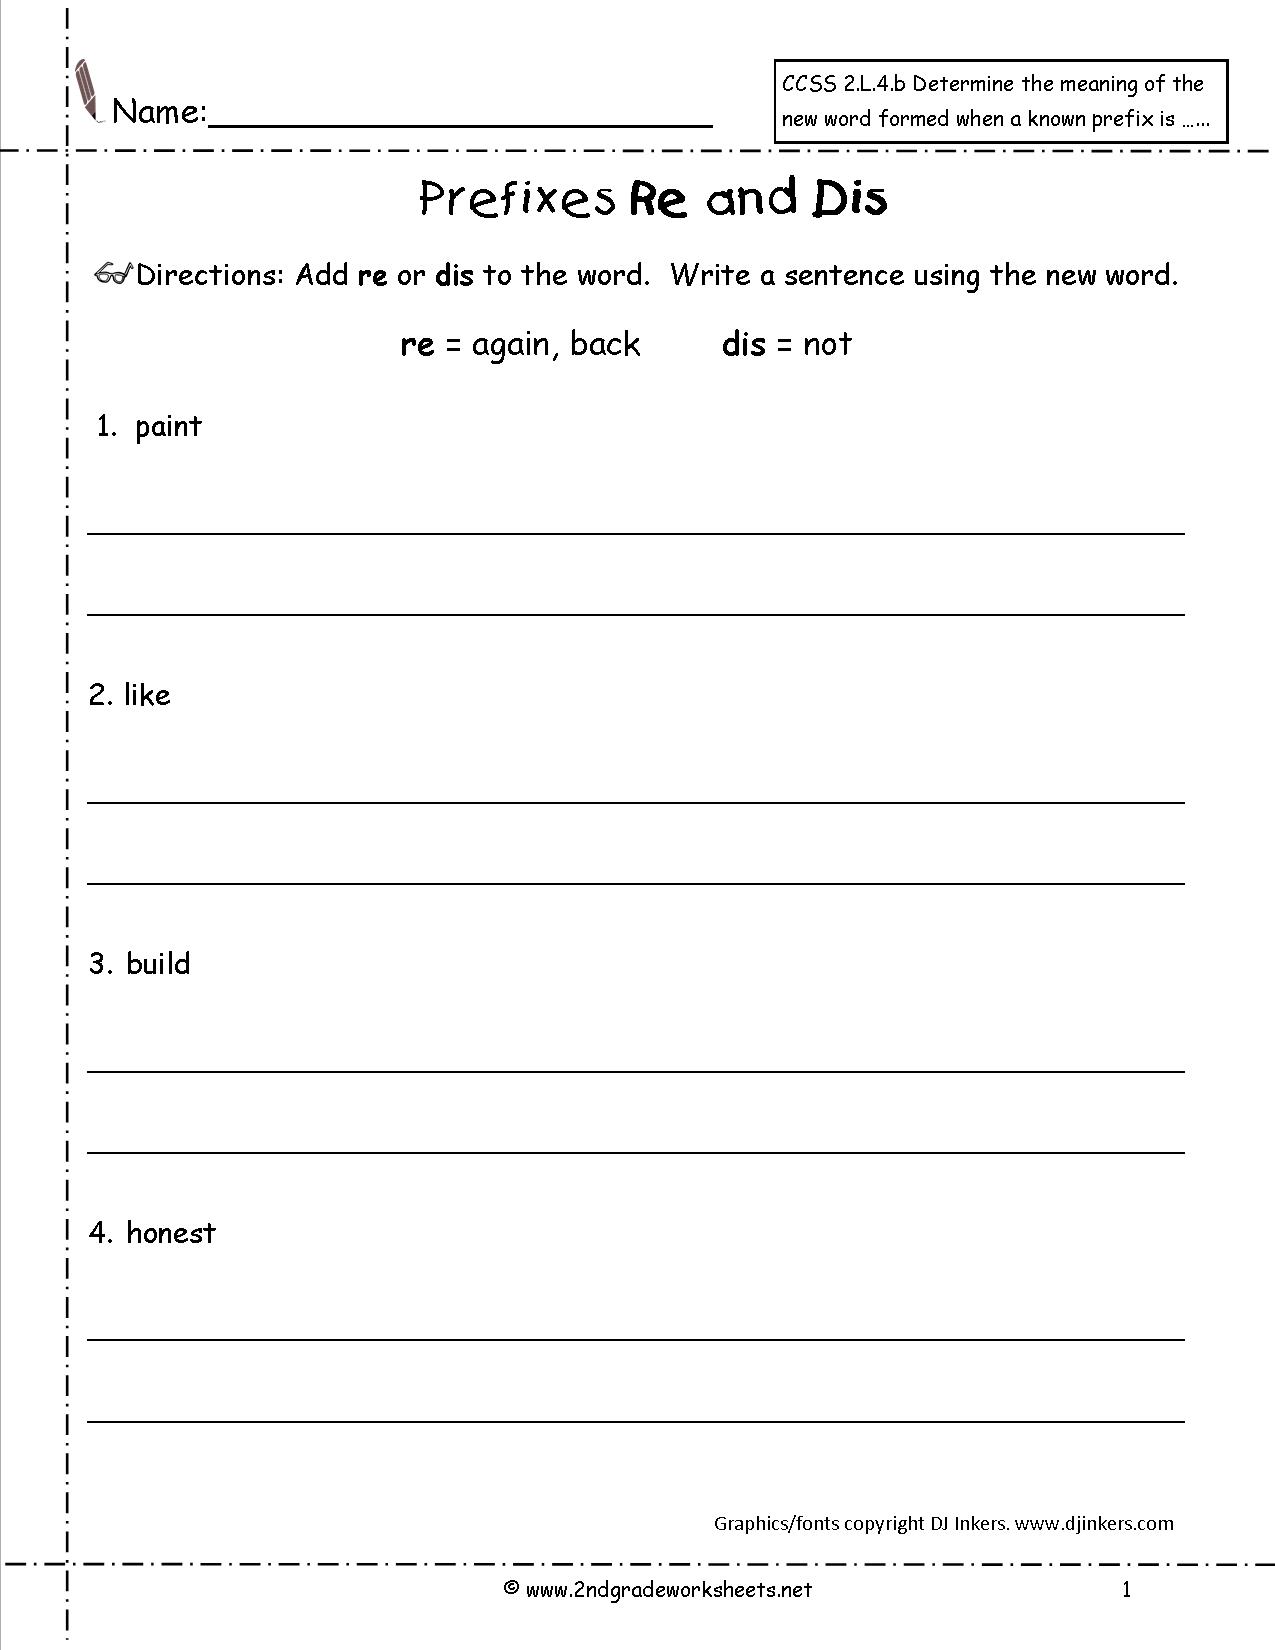 Pre And Re Worksheets The Best Worksheets Image Collection